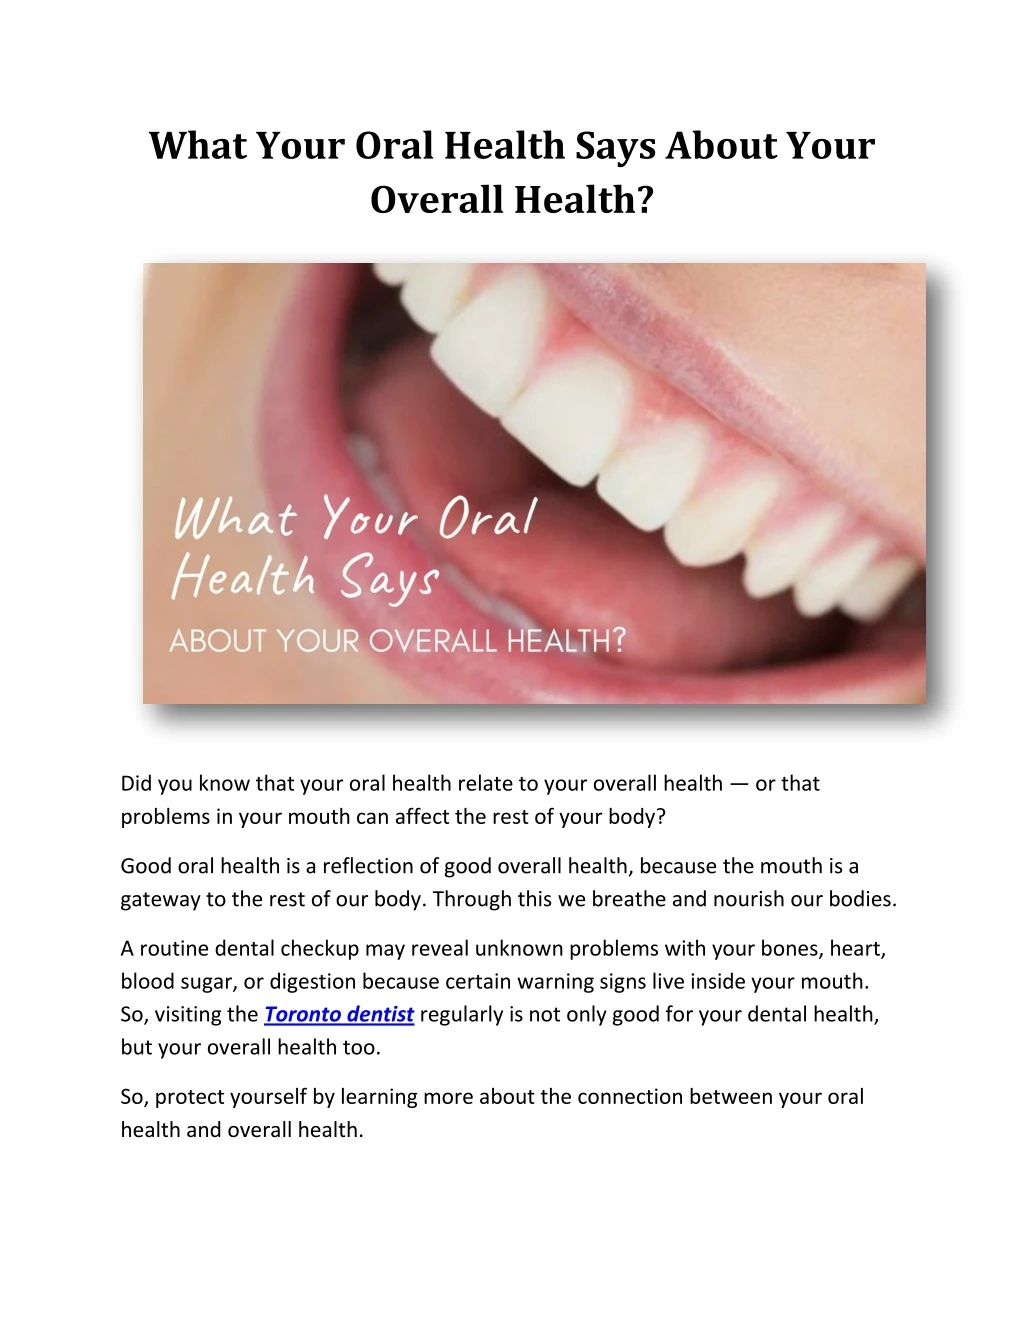 what your oral health says about your overall